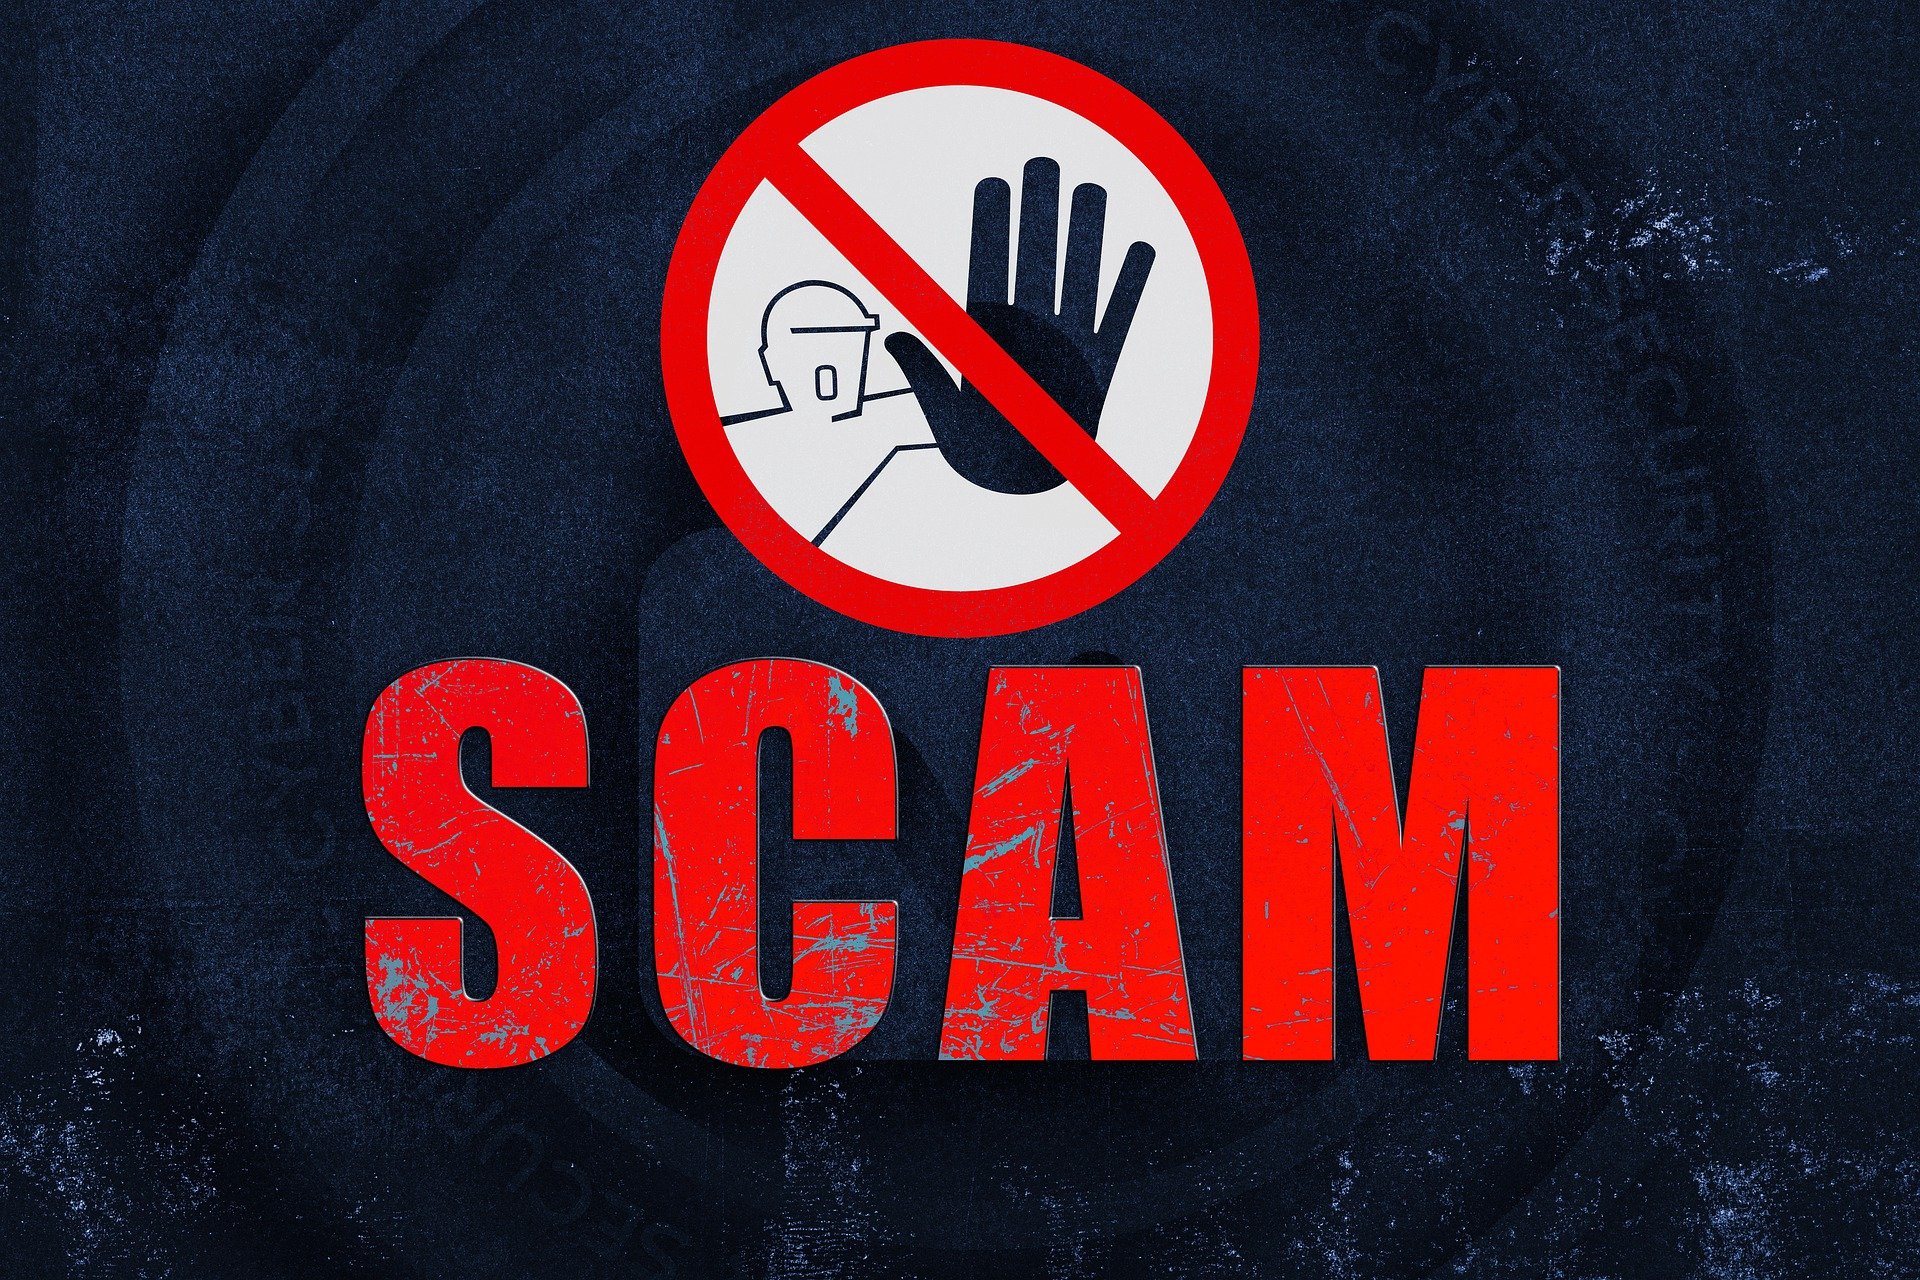 8443087744 Scam Call or Text Message - 844-308-7744